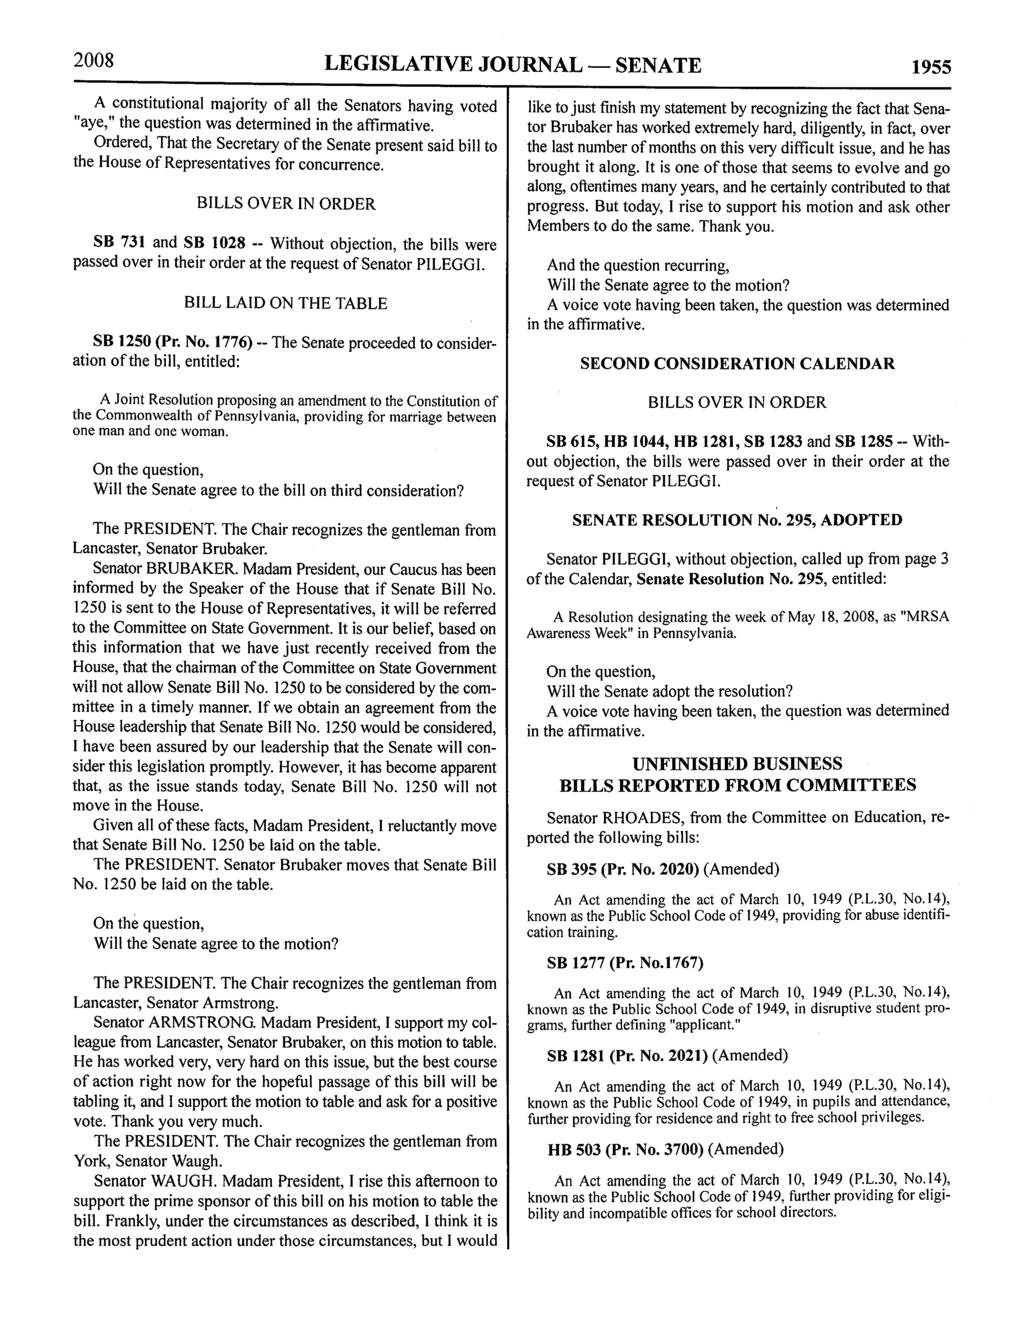 2008 LEGISLATIVE JOURNAL - SENATE 1955 A constitutional majority of all the Senators having voted "aye," the question was determined in the affirmative.